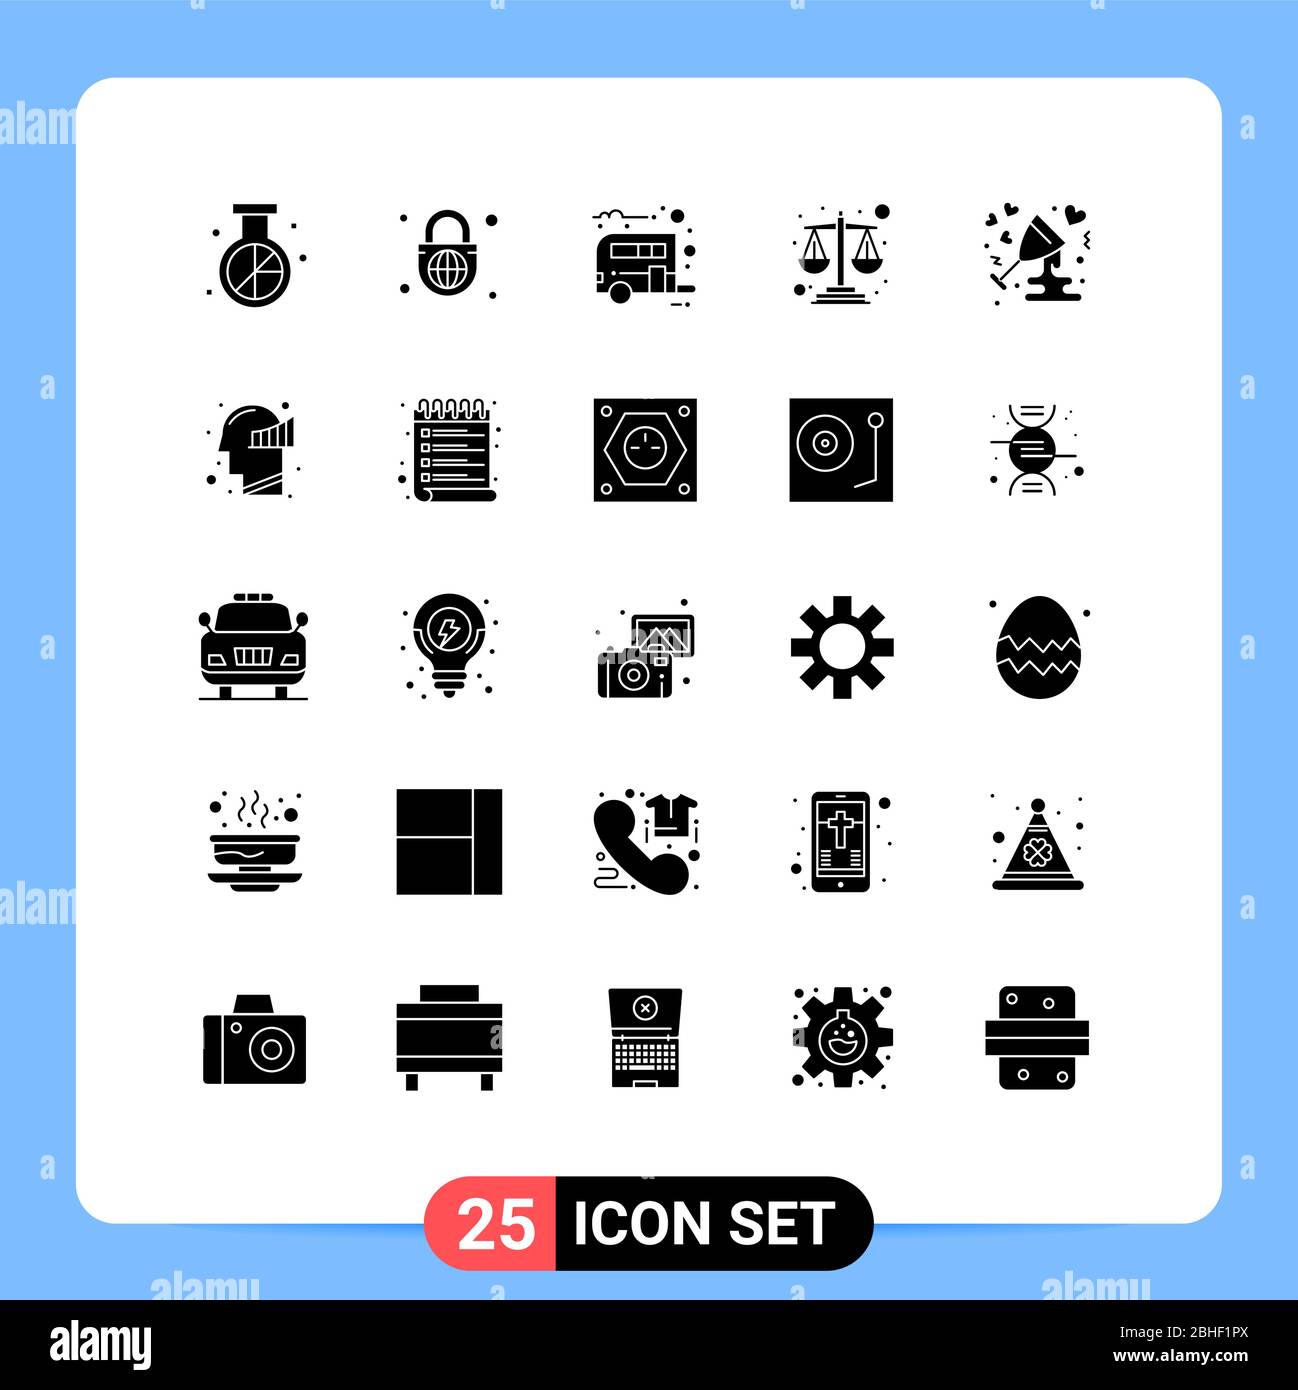 Modern Set Of 25 Solid Glyphs And Symbols Such As Celebrate